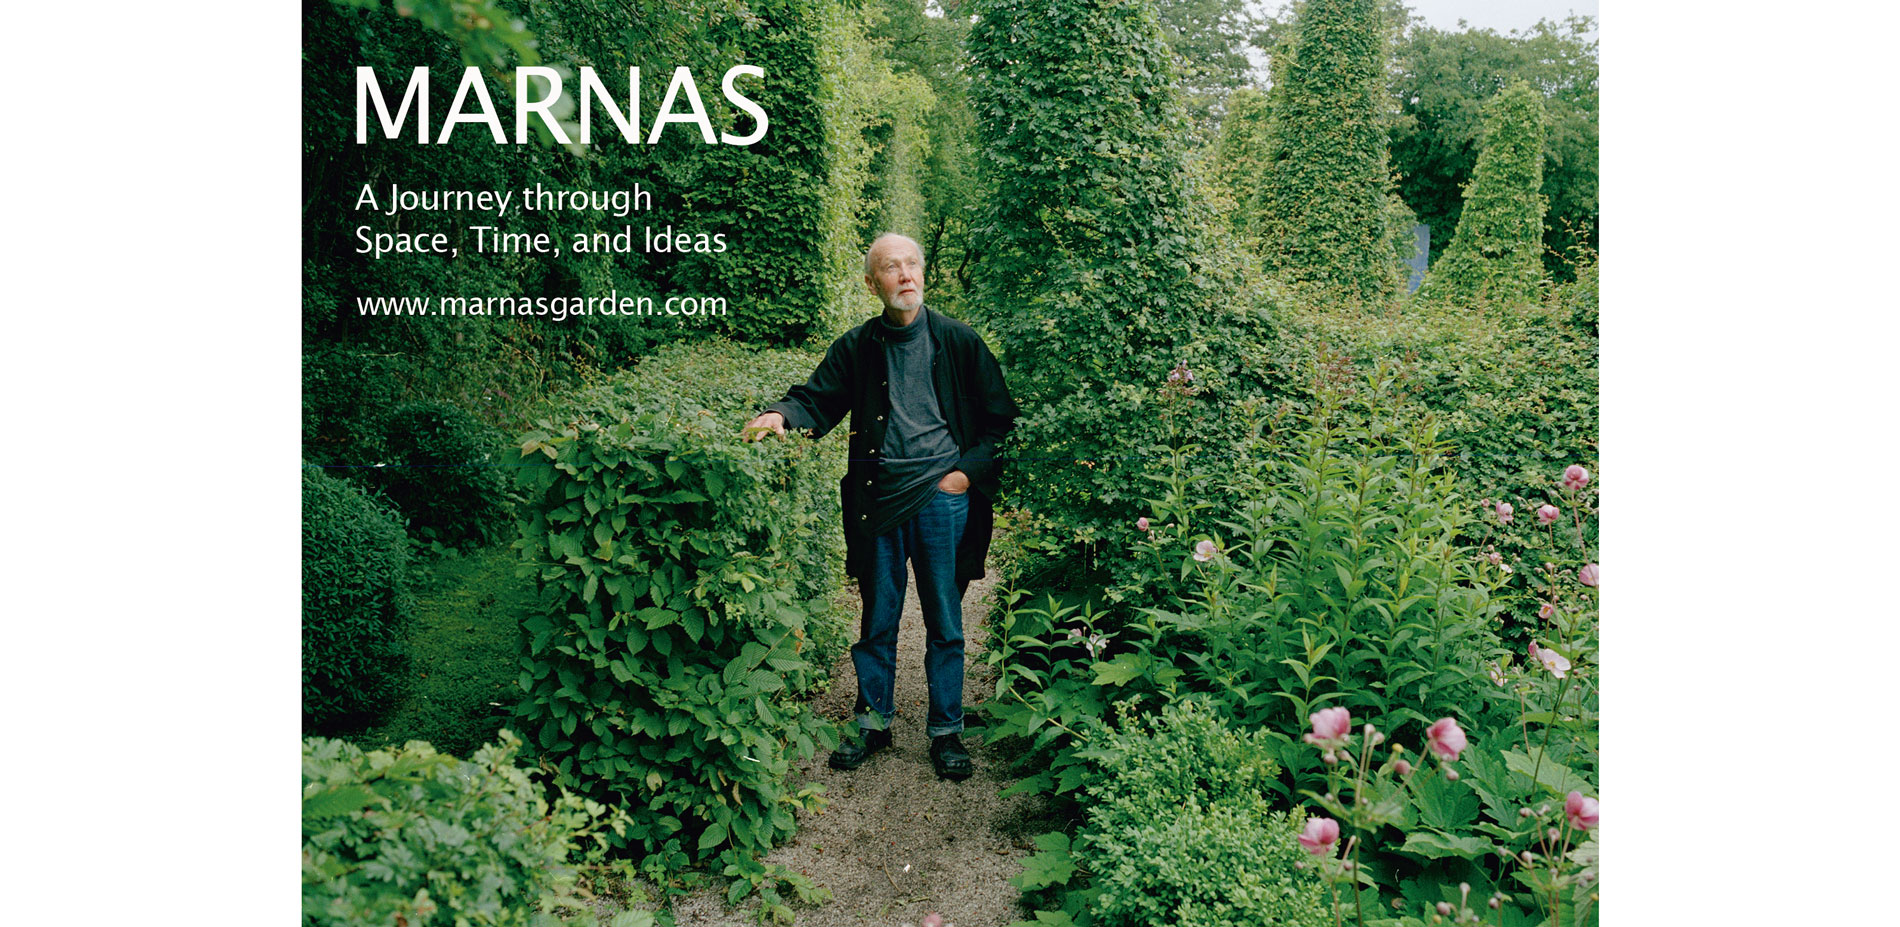 Marnas (www.marnasgarden.com) provides the first public access to the garden laboratory of master designer/theorist, Sven-Ingvar Andersson (1927-2007)…